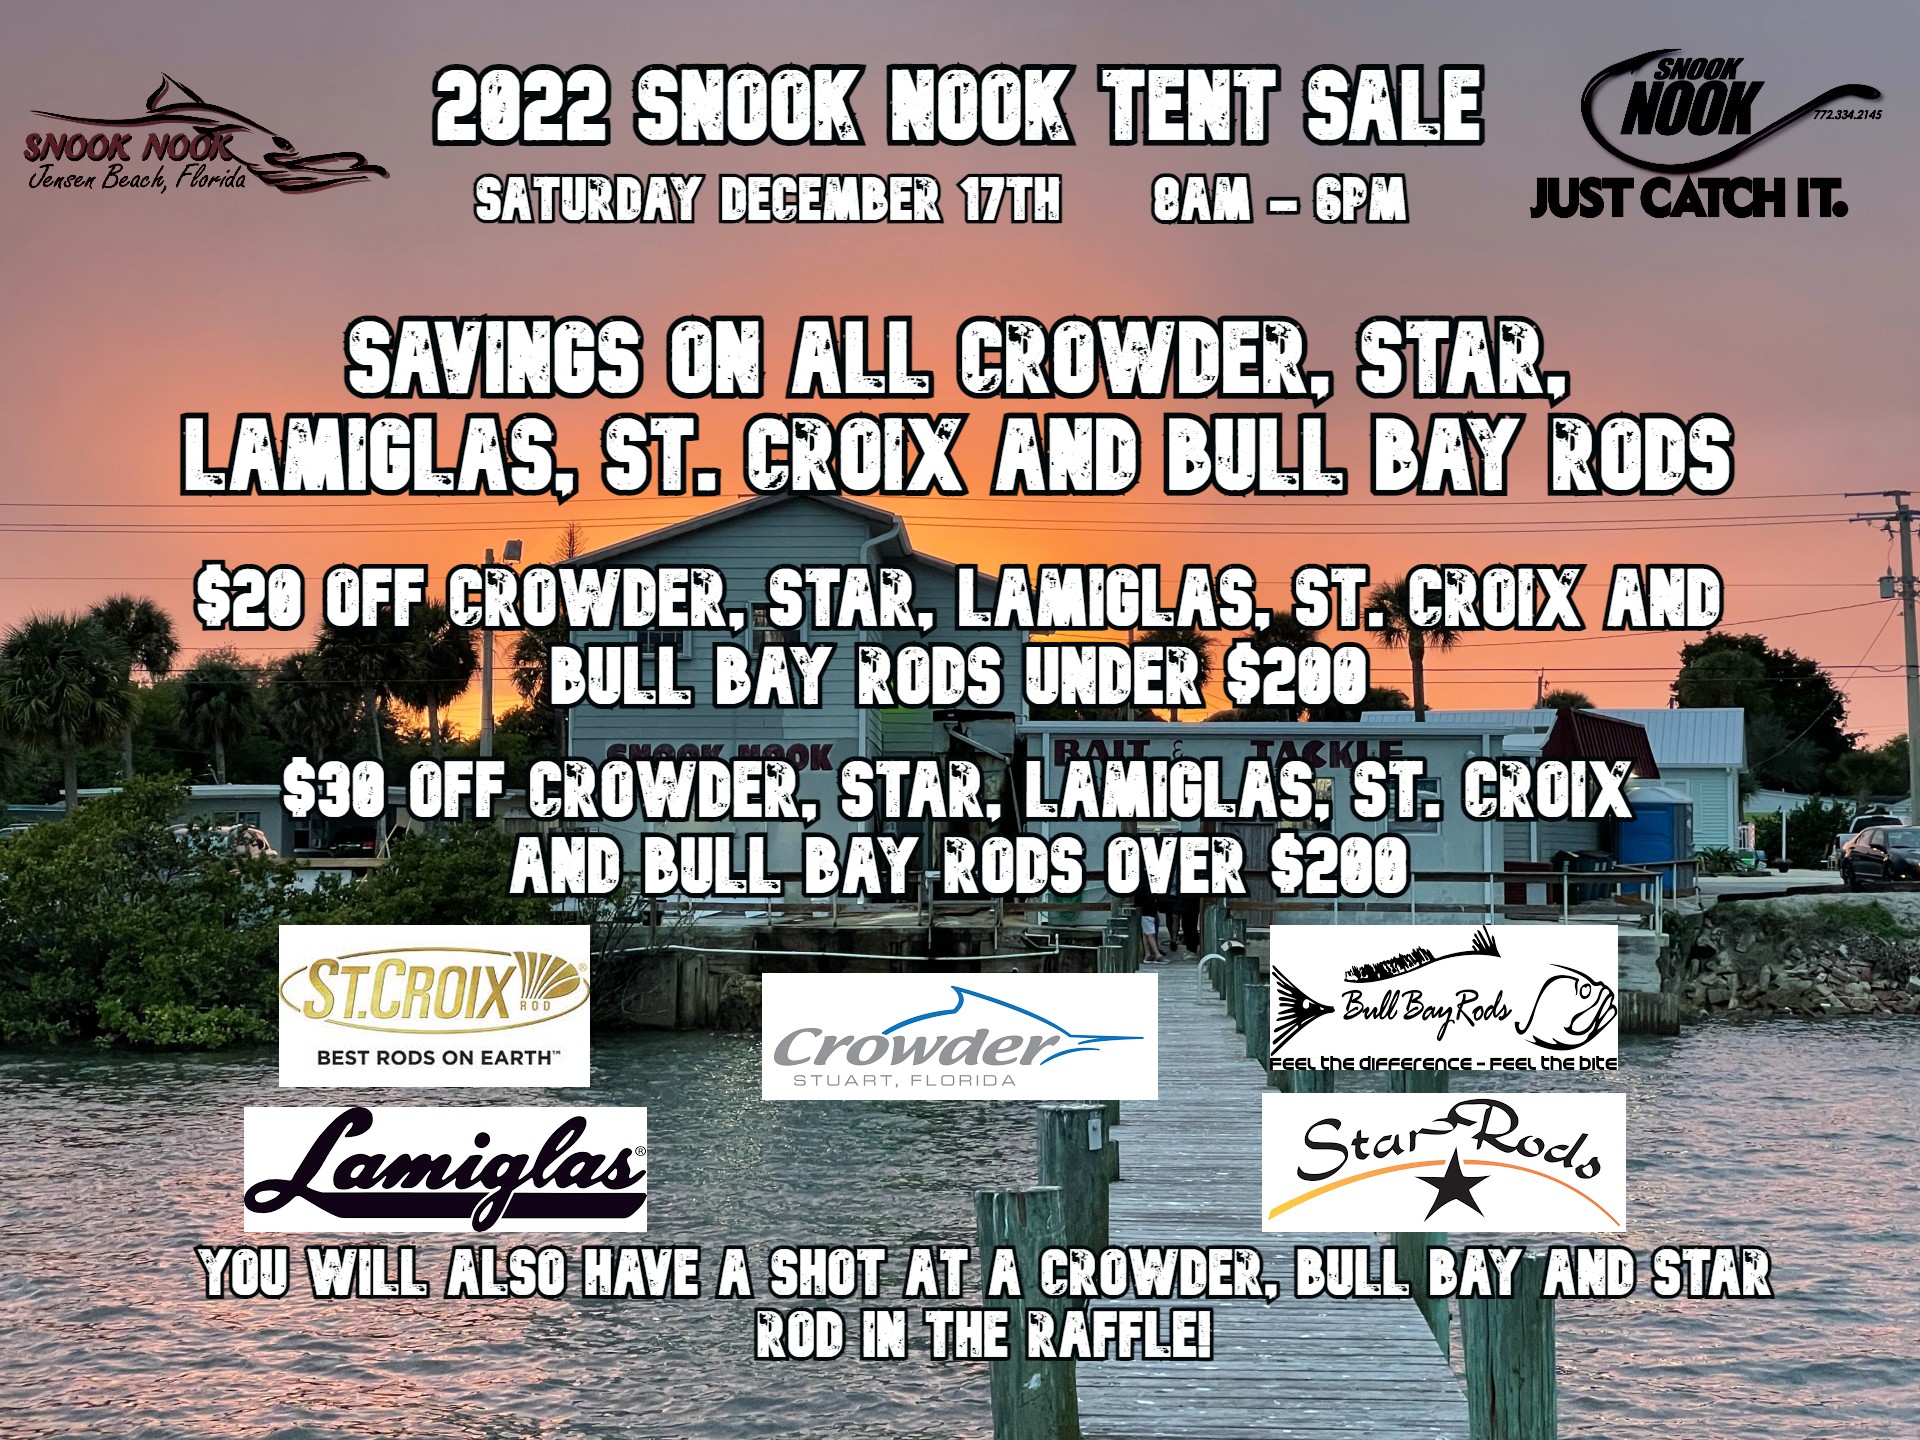 Crowder, Star, St. Croix, Lamiglas and Bull Bay Rods Tent Sale Promotion -  Snook Nook Bait & Tackle